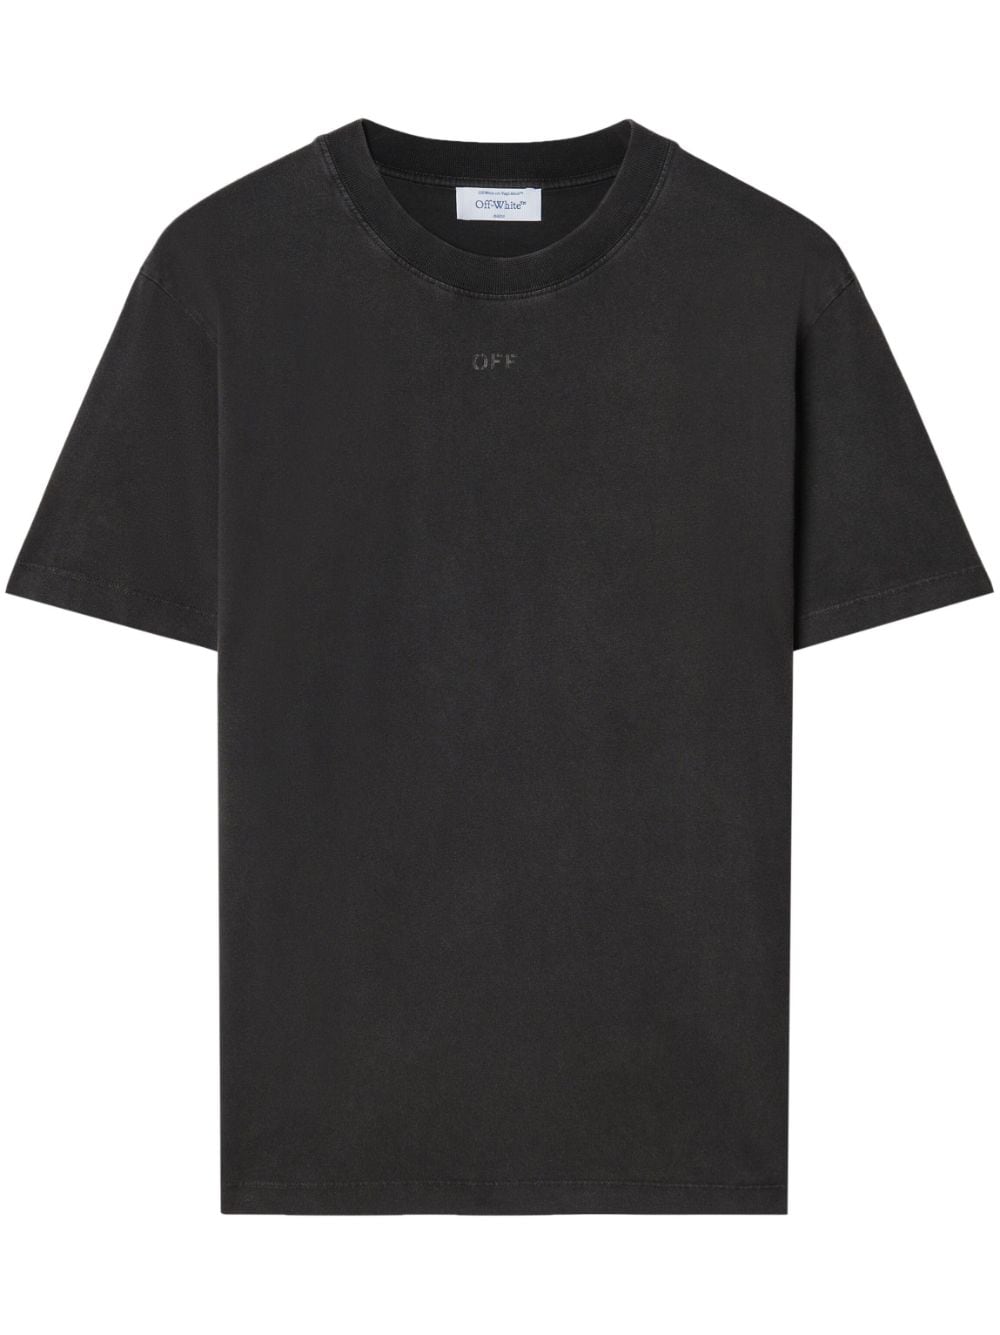 OFF-WHITE STAMPA T-SHIRT